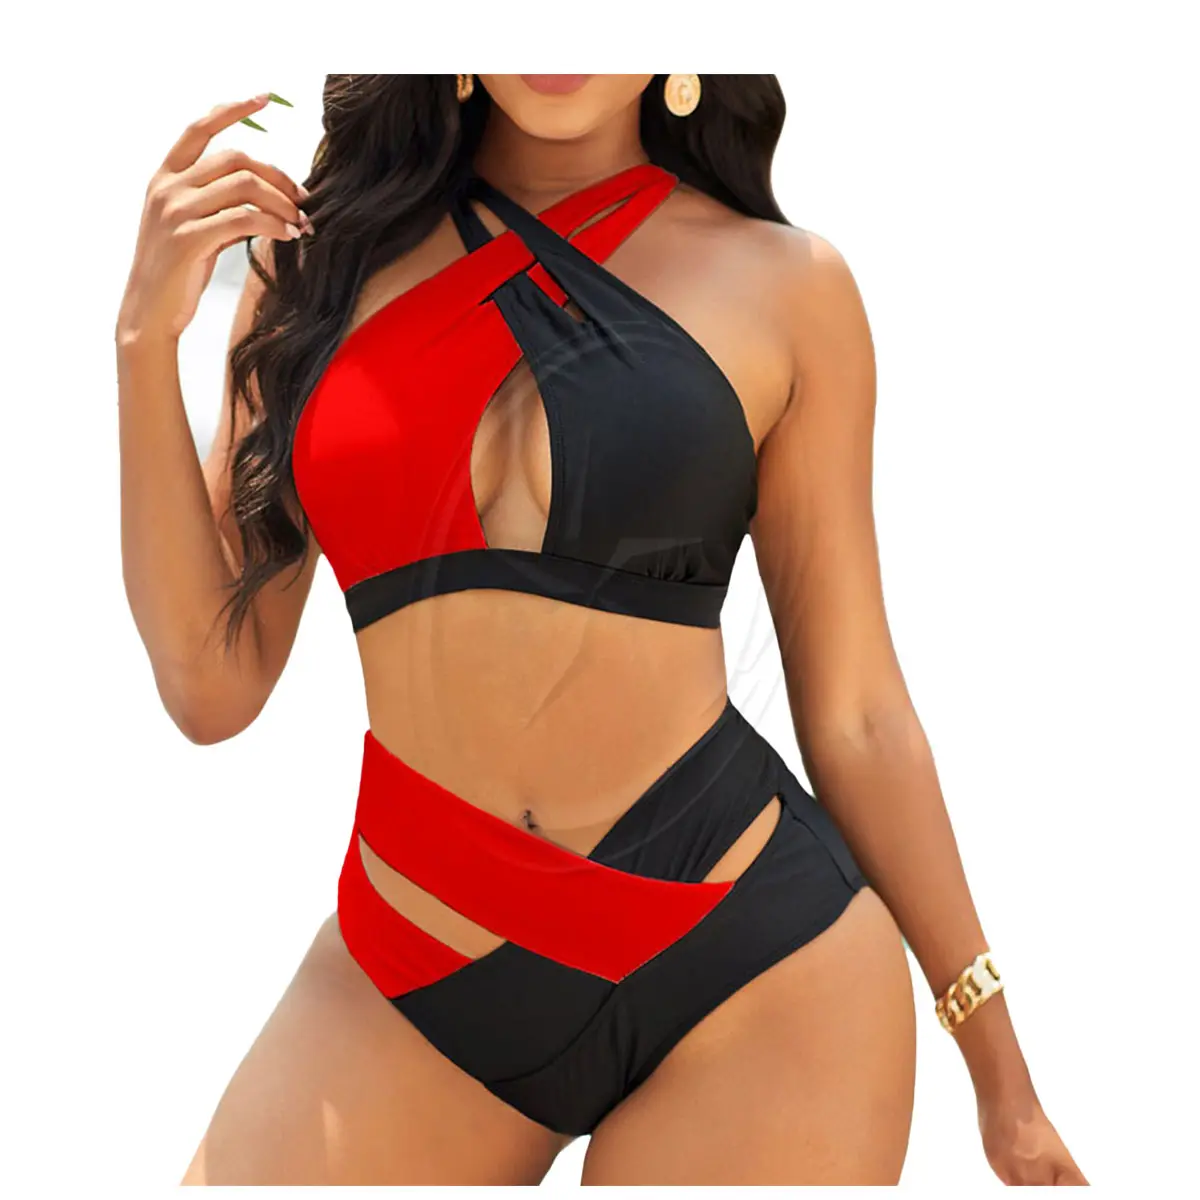 Women High Cut Bikini Sets Ladies Patchwork Swimsuit Sexy Push Up Swimwear Summer New Hollow Out Bathing Suits